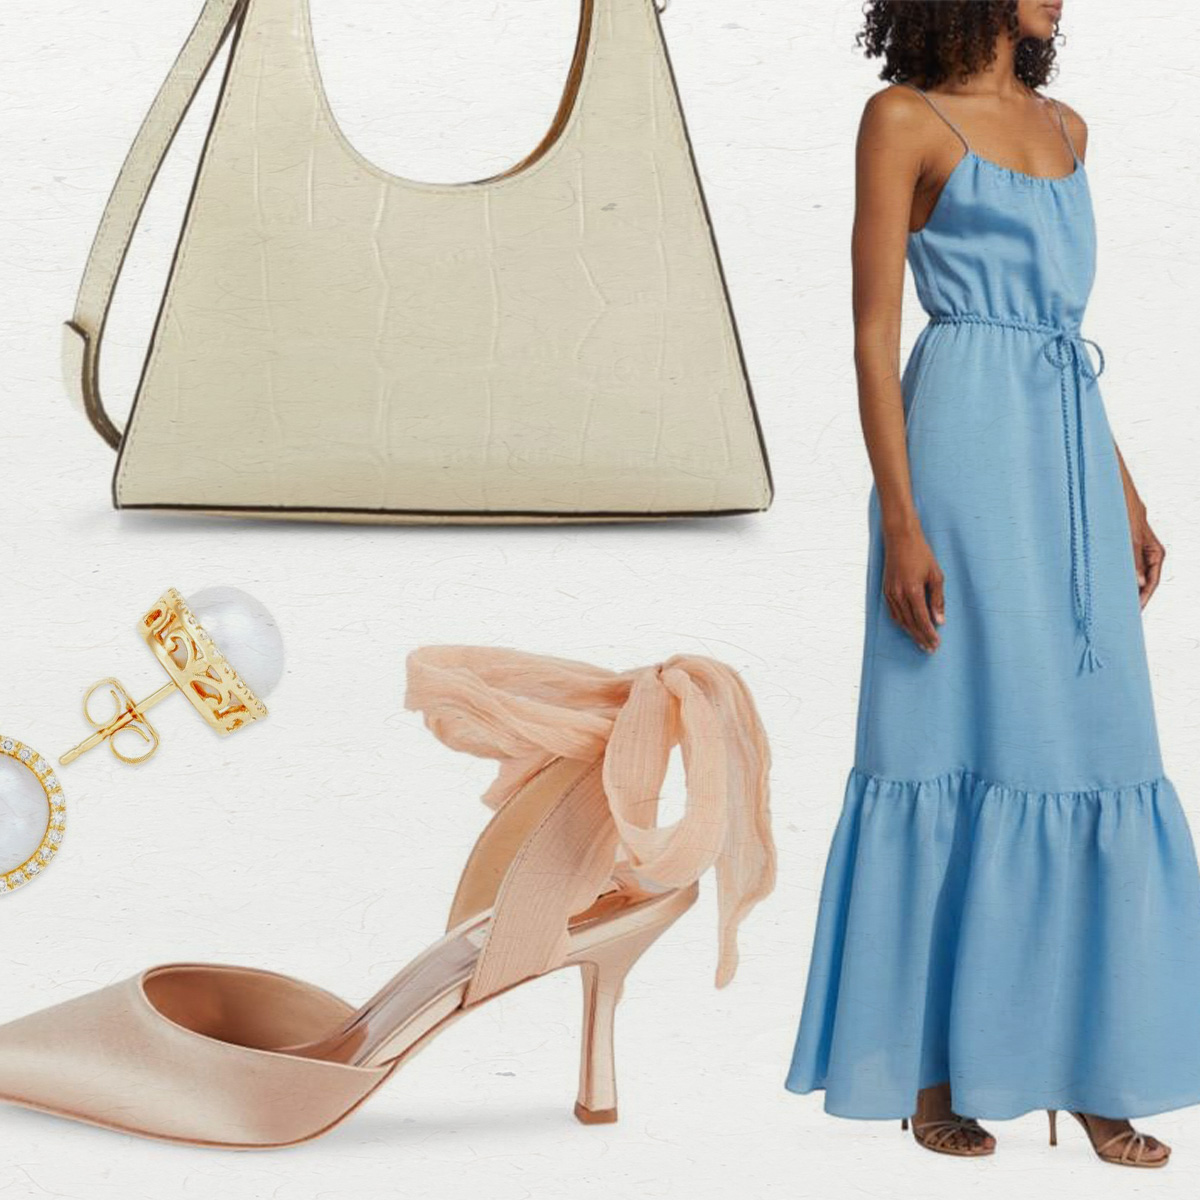 My Bestie Is Going to a Spring Wedding—16 Finds I Immediately Texted Her